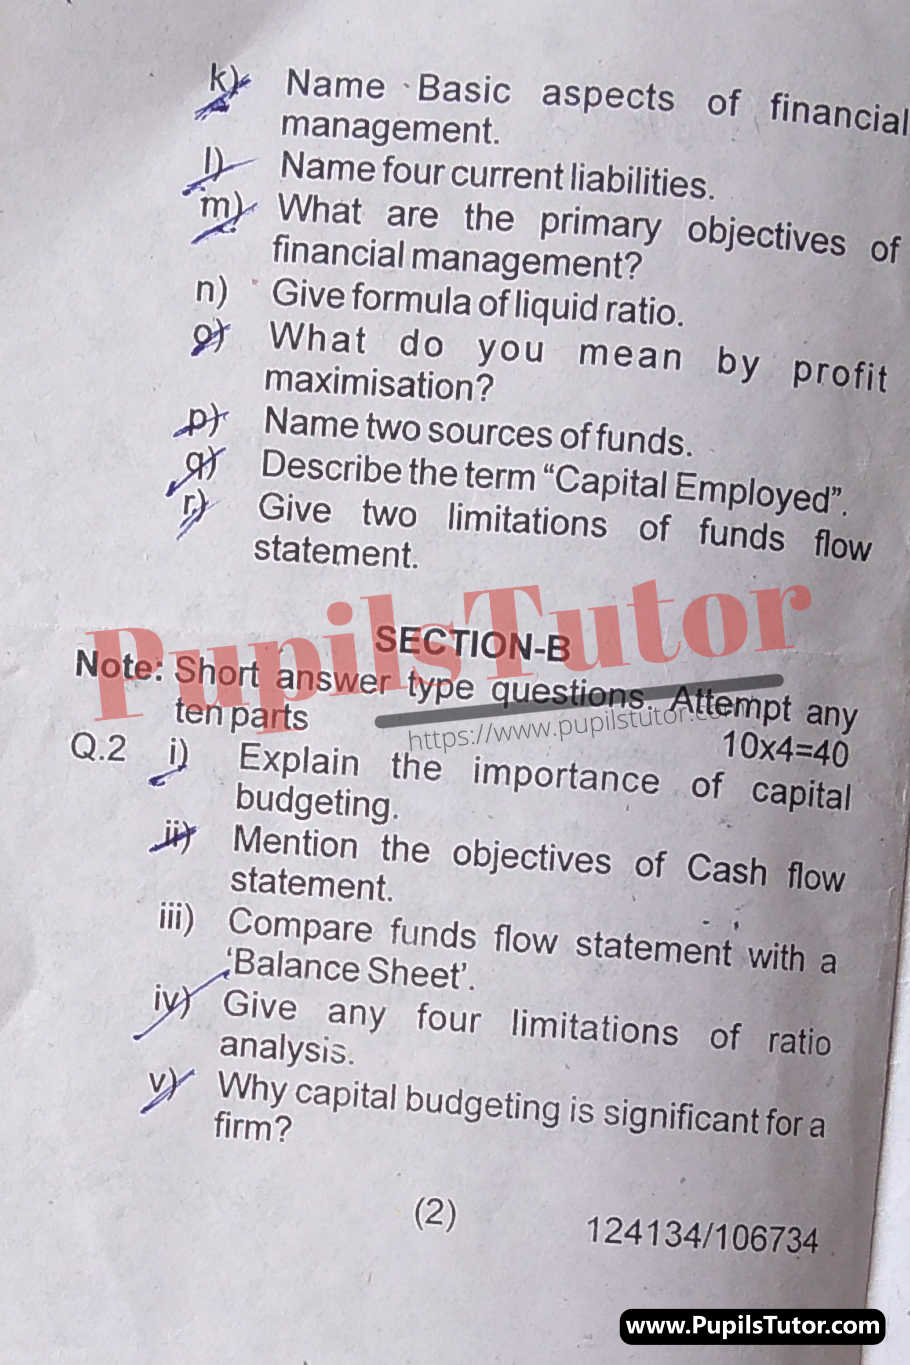 Haryana State Board of Technical Education (HSBTE) FAA (Finance Accounts And Auditing) Financial Management - I Third Semester Important Question Answer And Solution - www.pupilstutor.com (Paper Page Number 2)